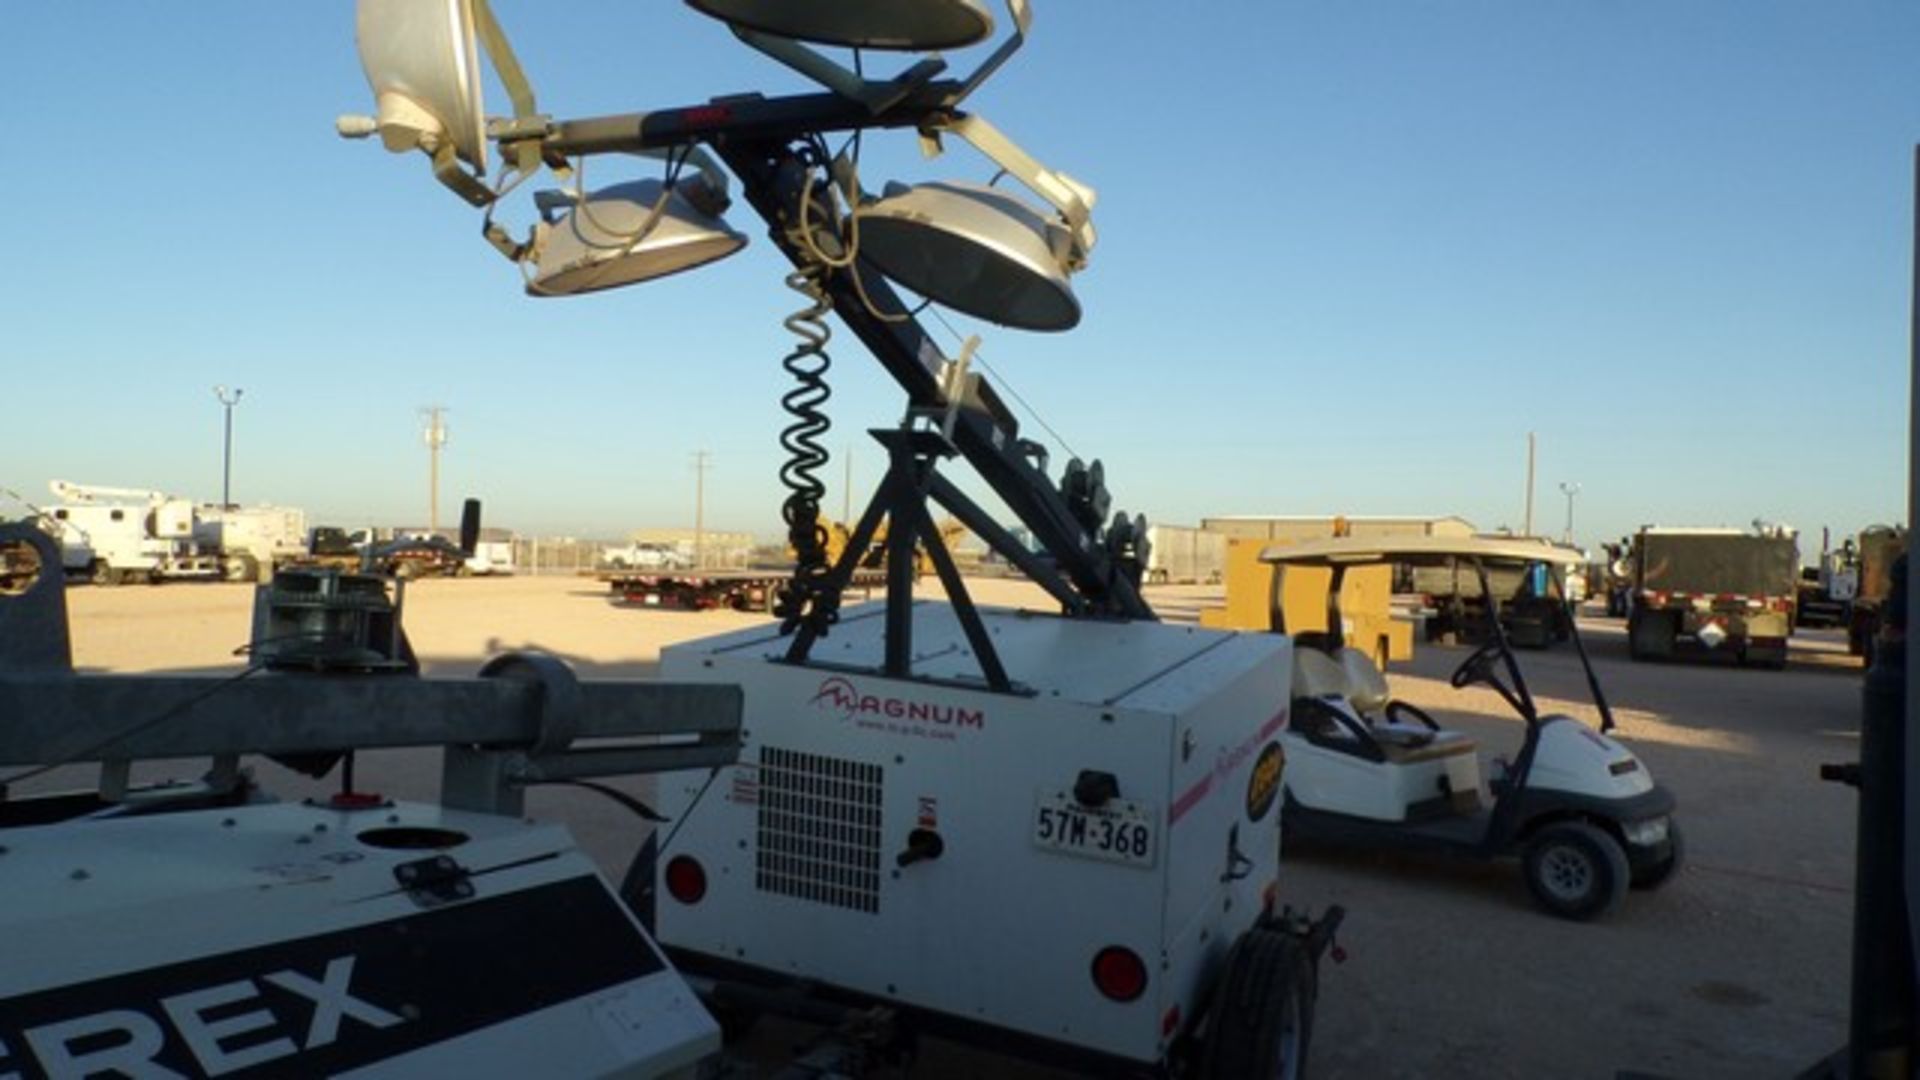 Located in YARD 1 - Midland, TX (2803) 2012 MAGNUM MLT5060K S/A LIGHT TOWER, SN- 1114756, P/B 3 - Image 3 of 6